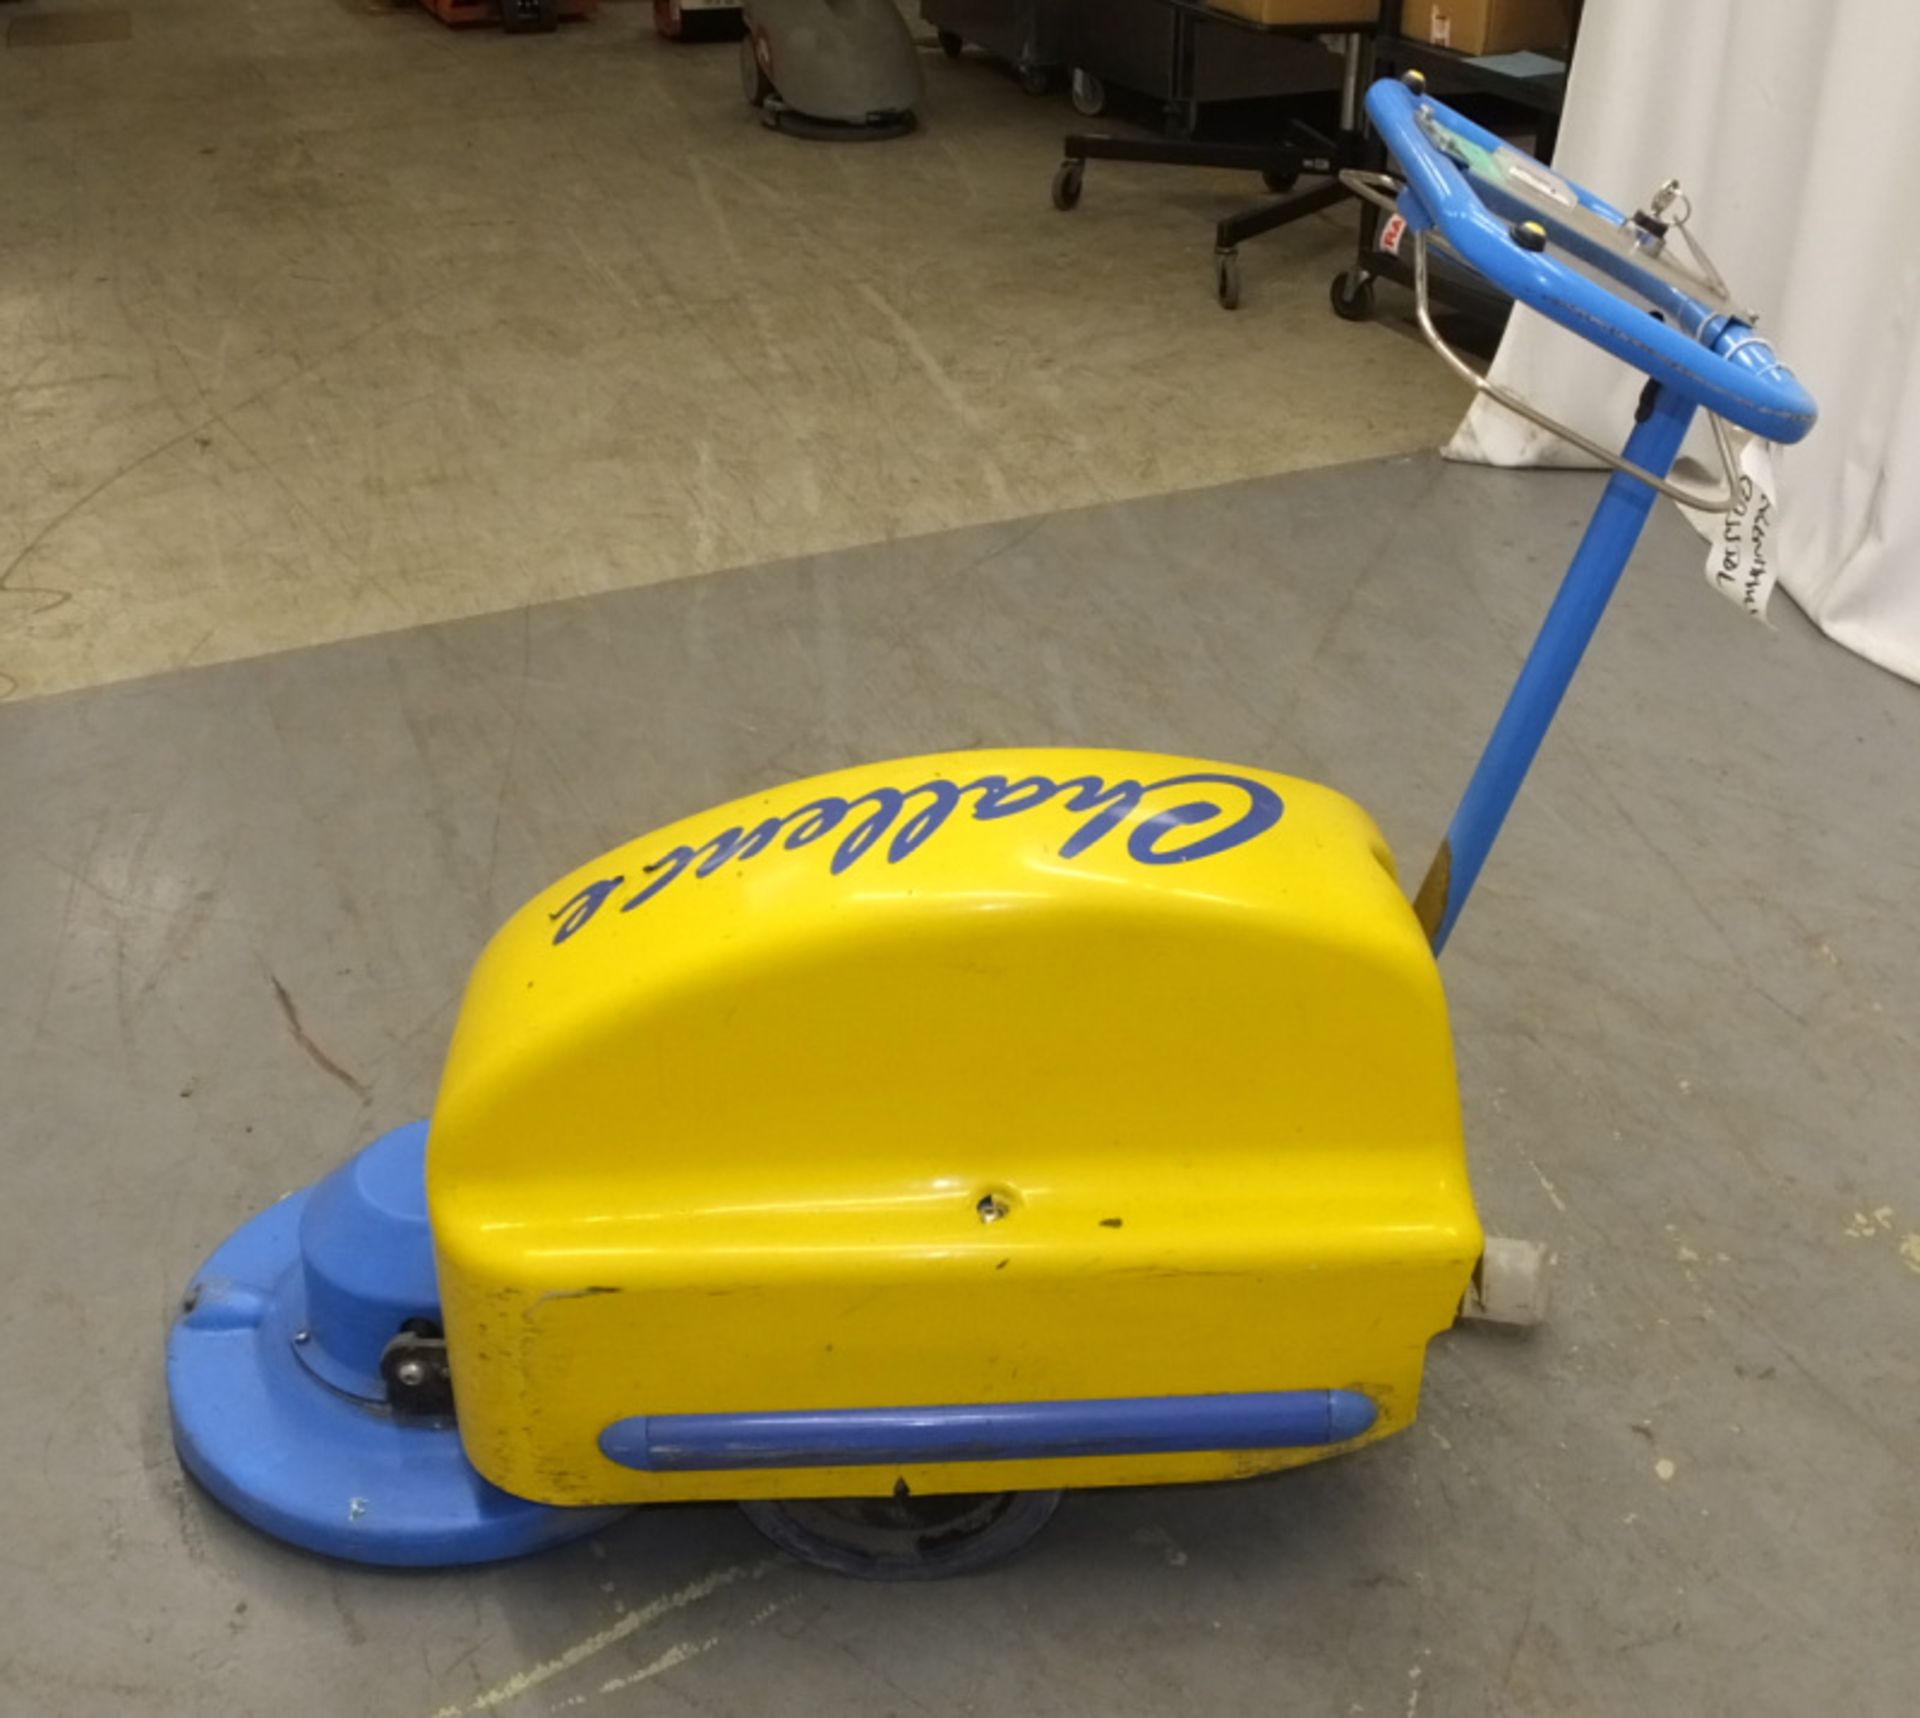 Tennant Challenger Zippy 430 Walk-Behind Floor Cleaner - has key but doesn't power up - cracked case - Image 4 of 8